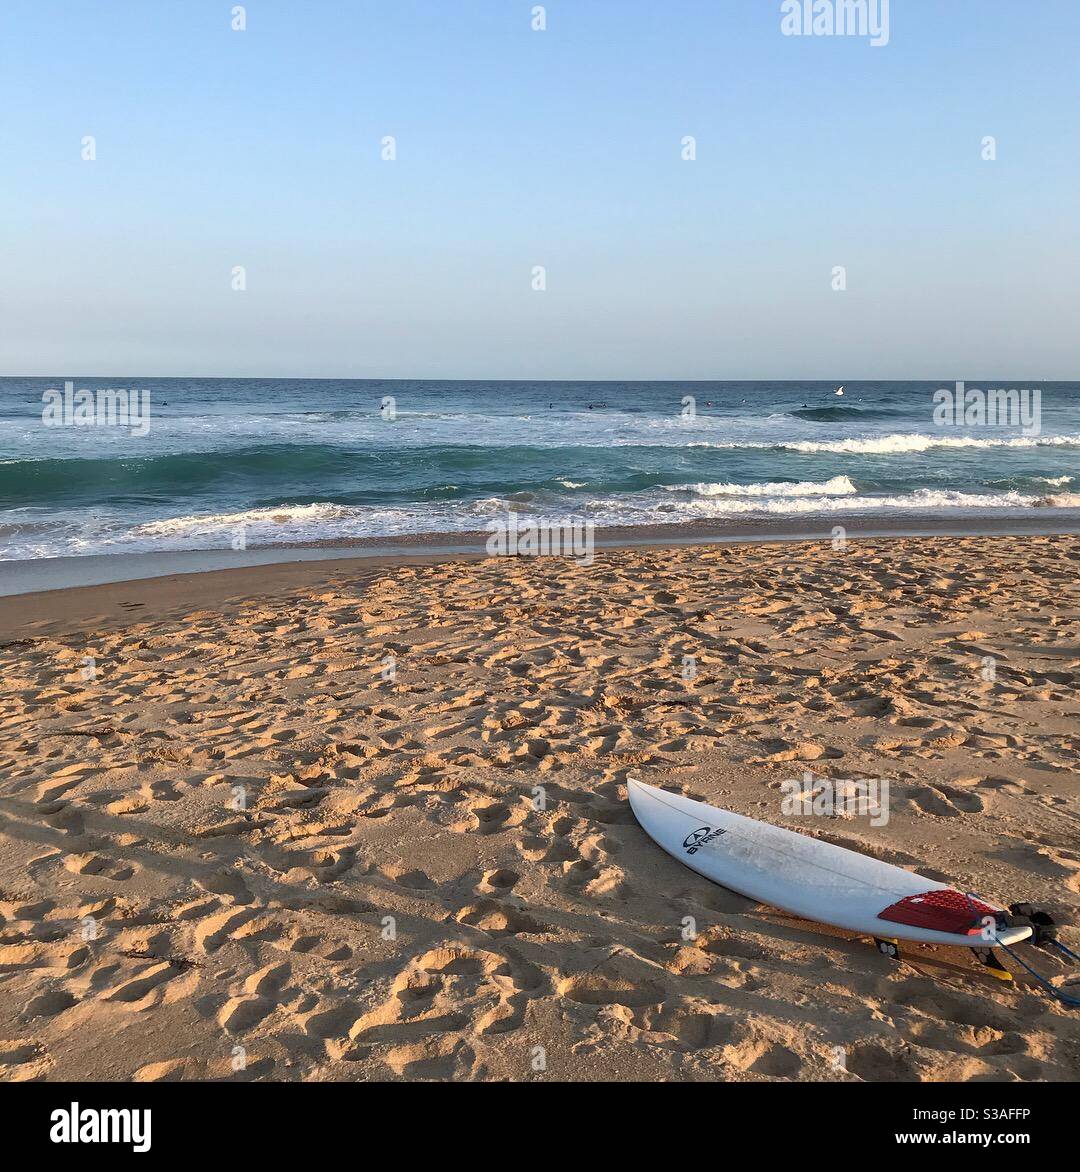 Surfboard on the beach at Stanwell Park, NSW Australia Stock Photo